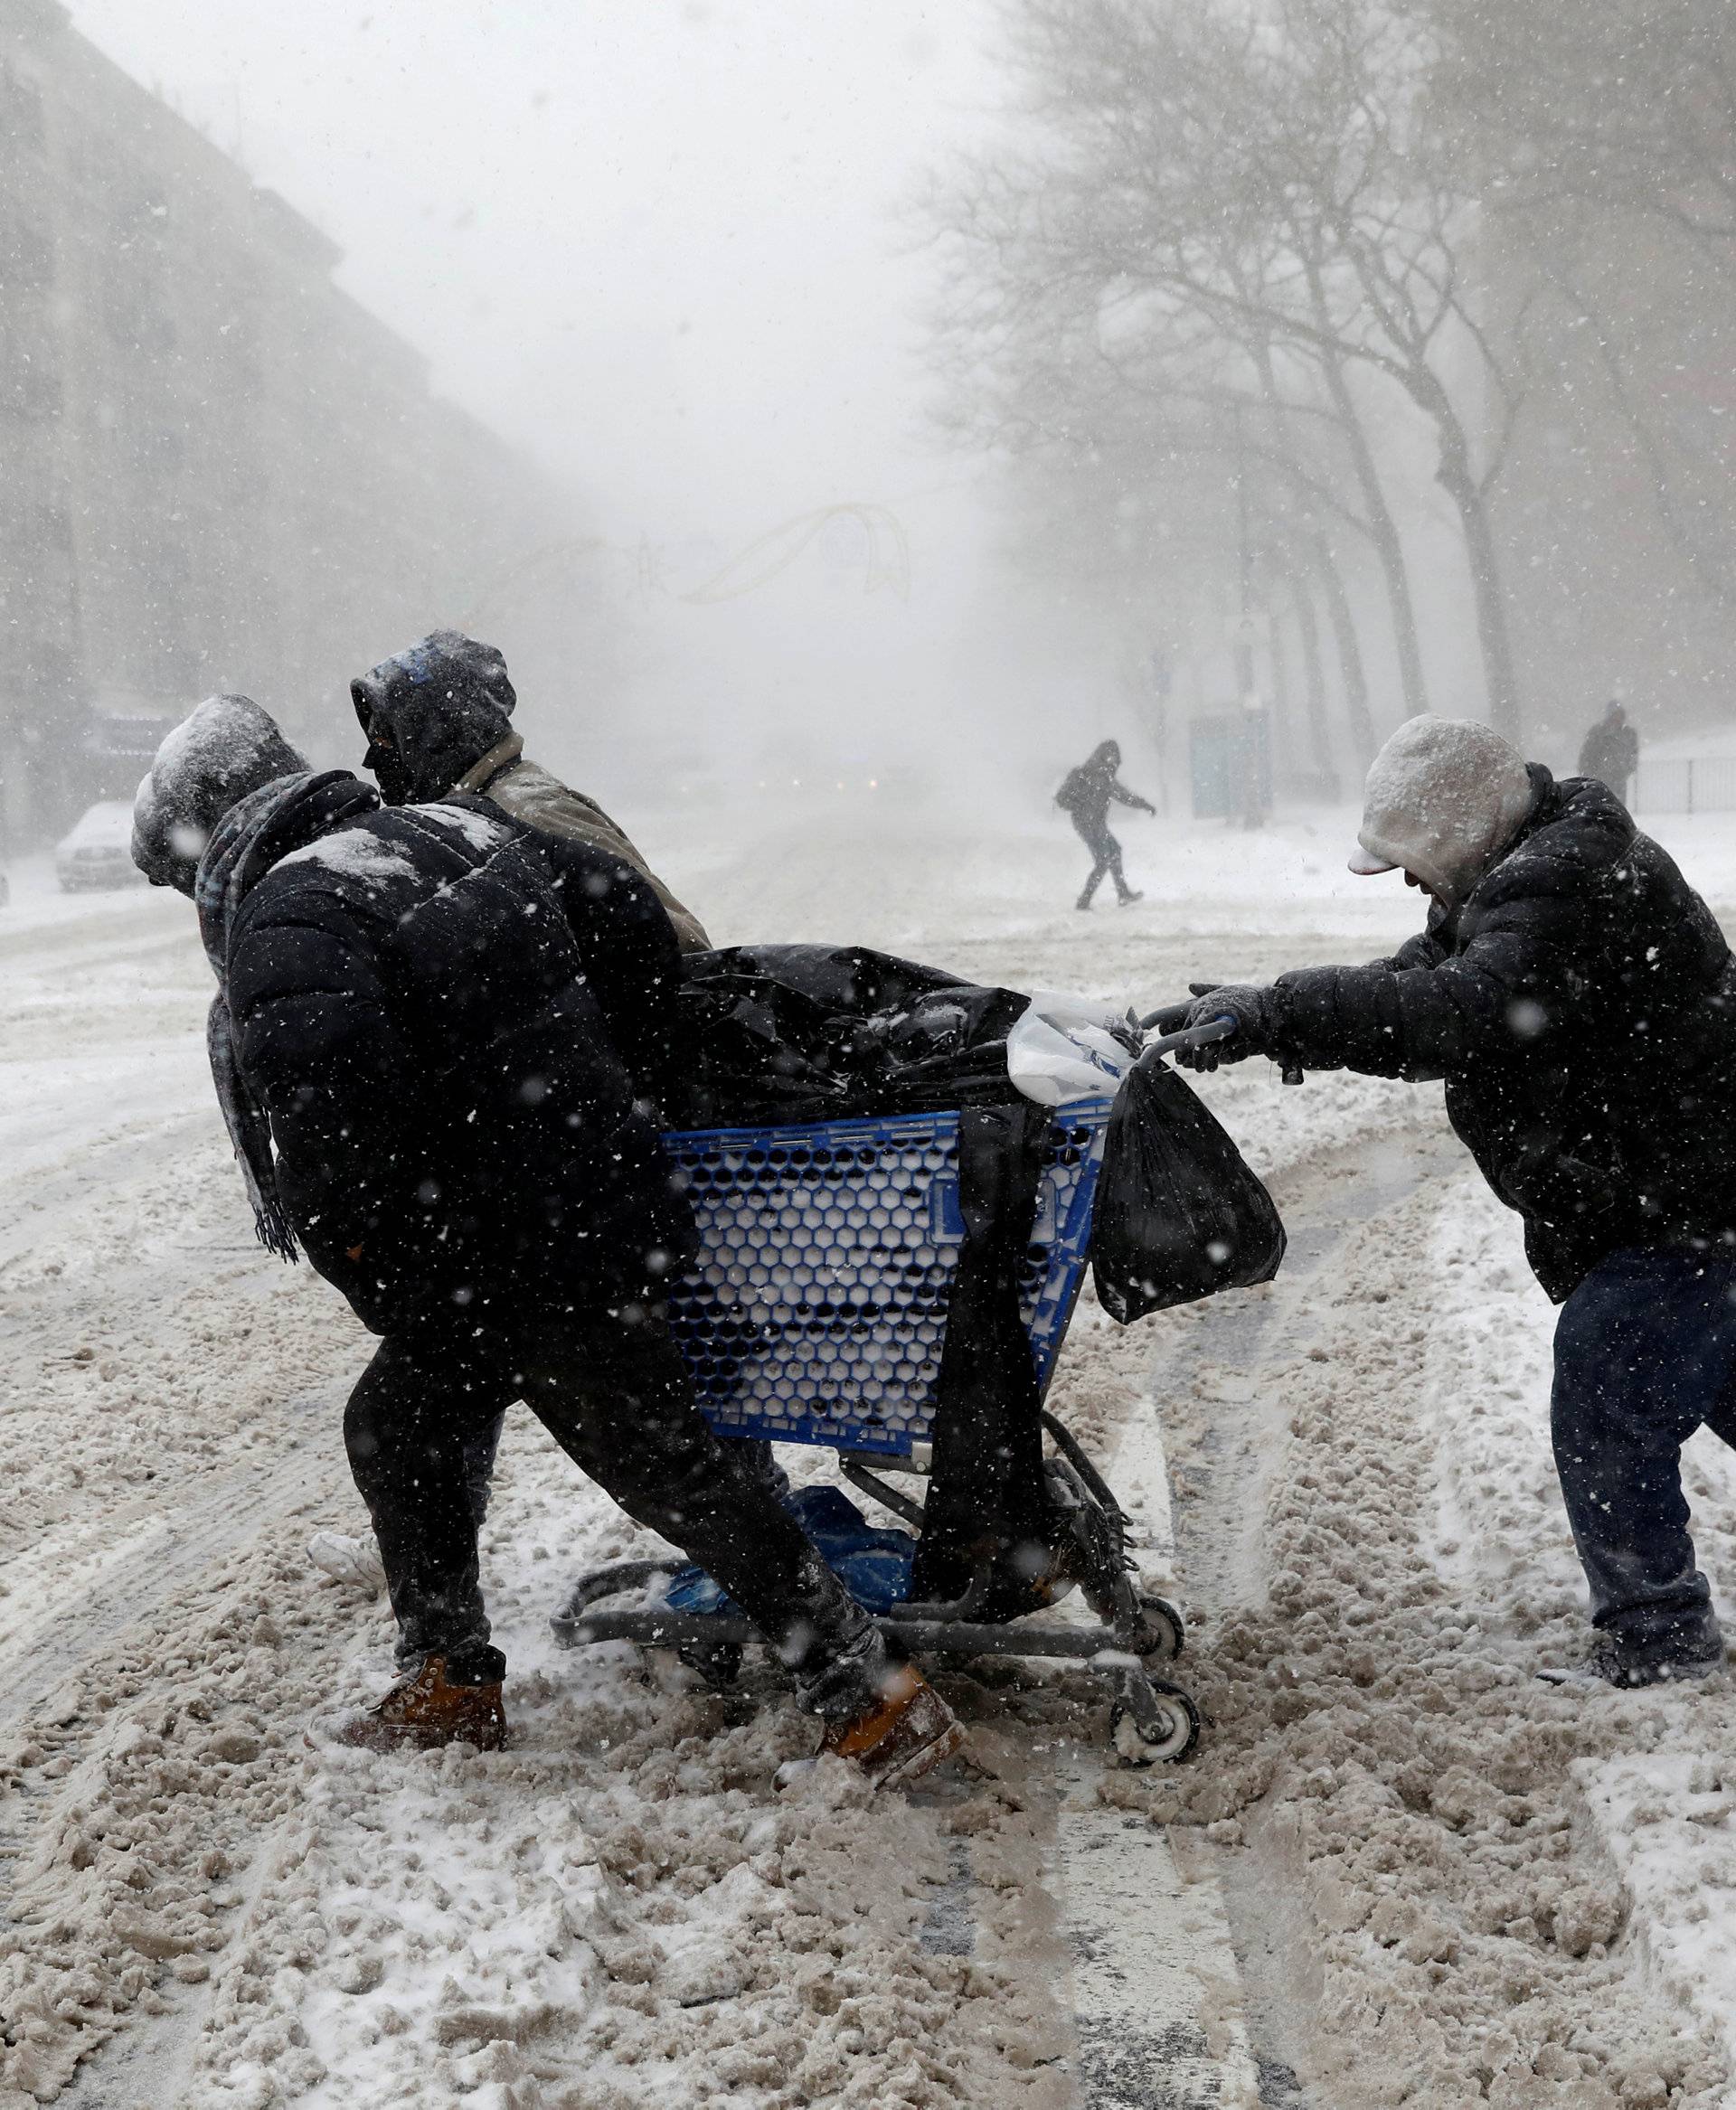 Men struggle against wind and snow as they push a shopping cart across 125th street in upper Manhattan during a snowstorm in New York City